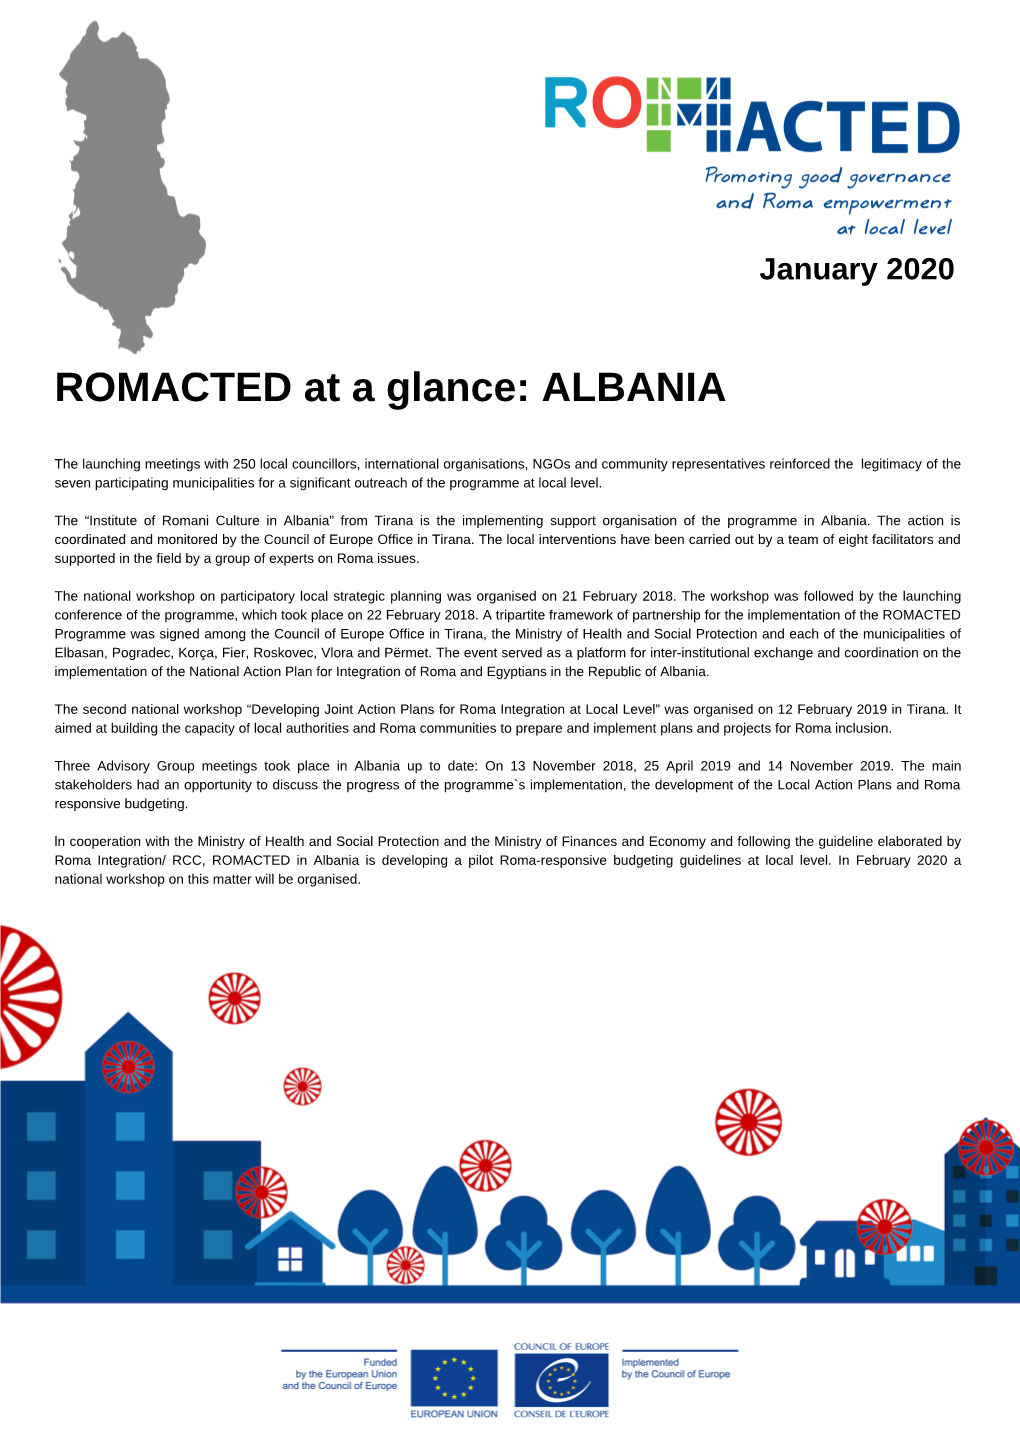 ROMACTED at a Glance: ALBANIA